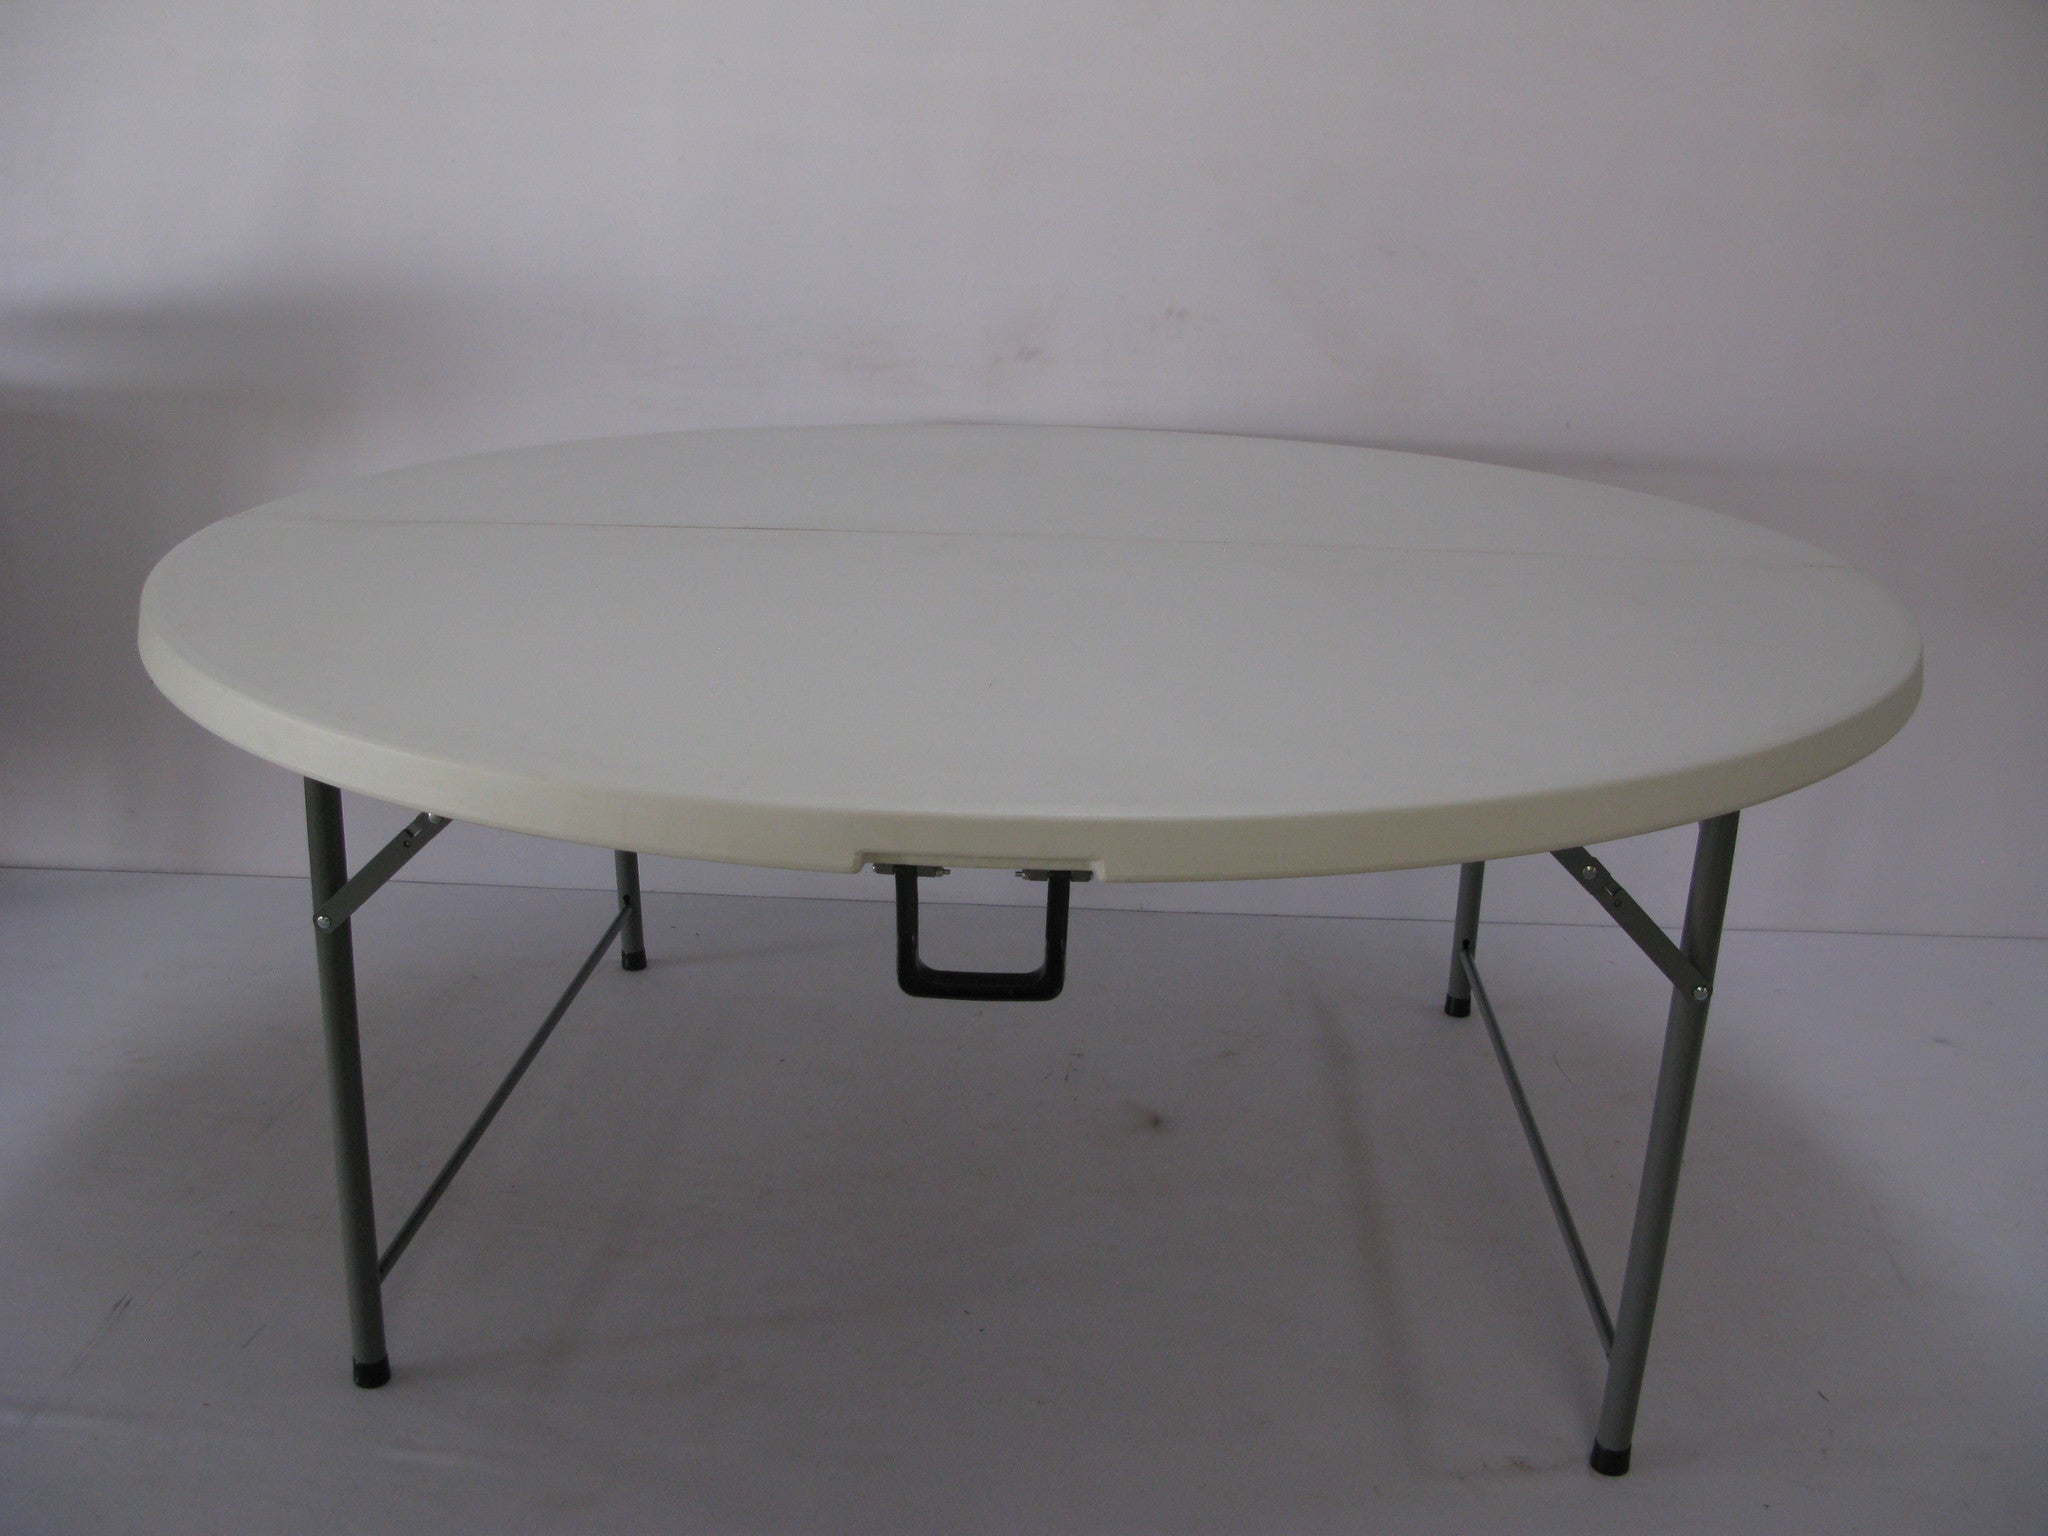 Rou003 Fold In Half Round Plastic Tables 1800mm Seats 10 12 People Moolla Furniture Corp Cc